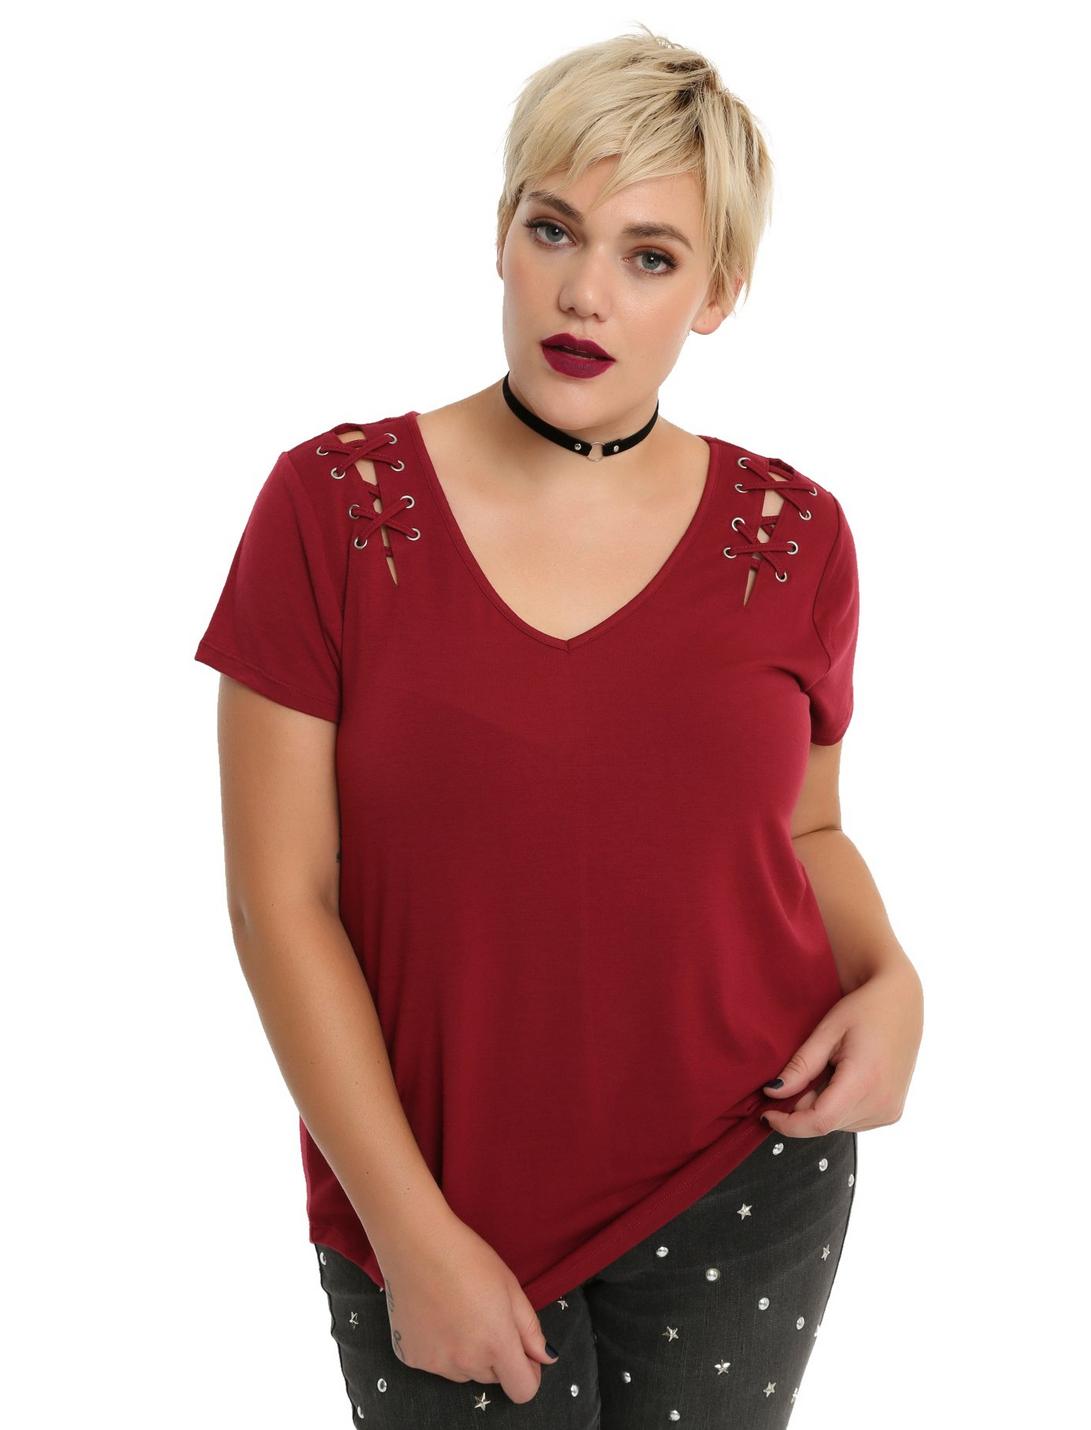 Burgundy Lace-Up Girls Top Plus Size, RED, hi-res